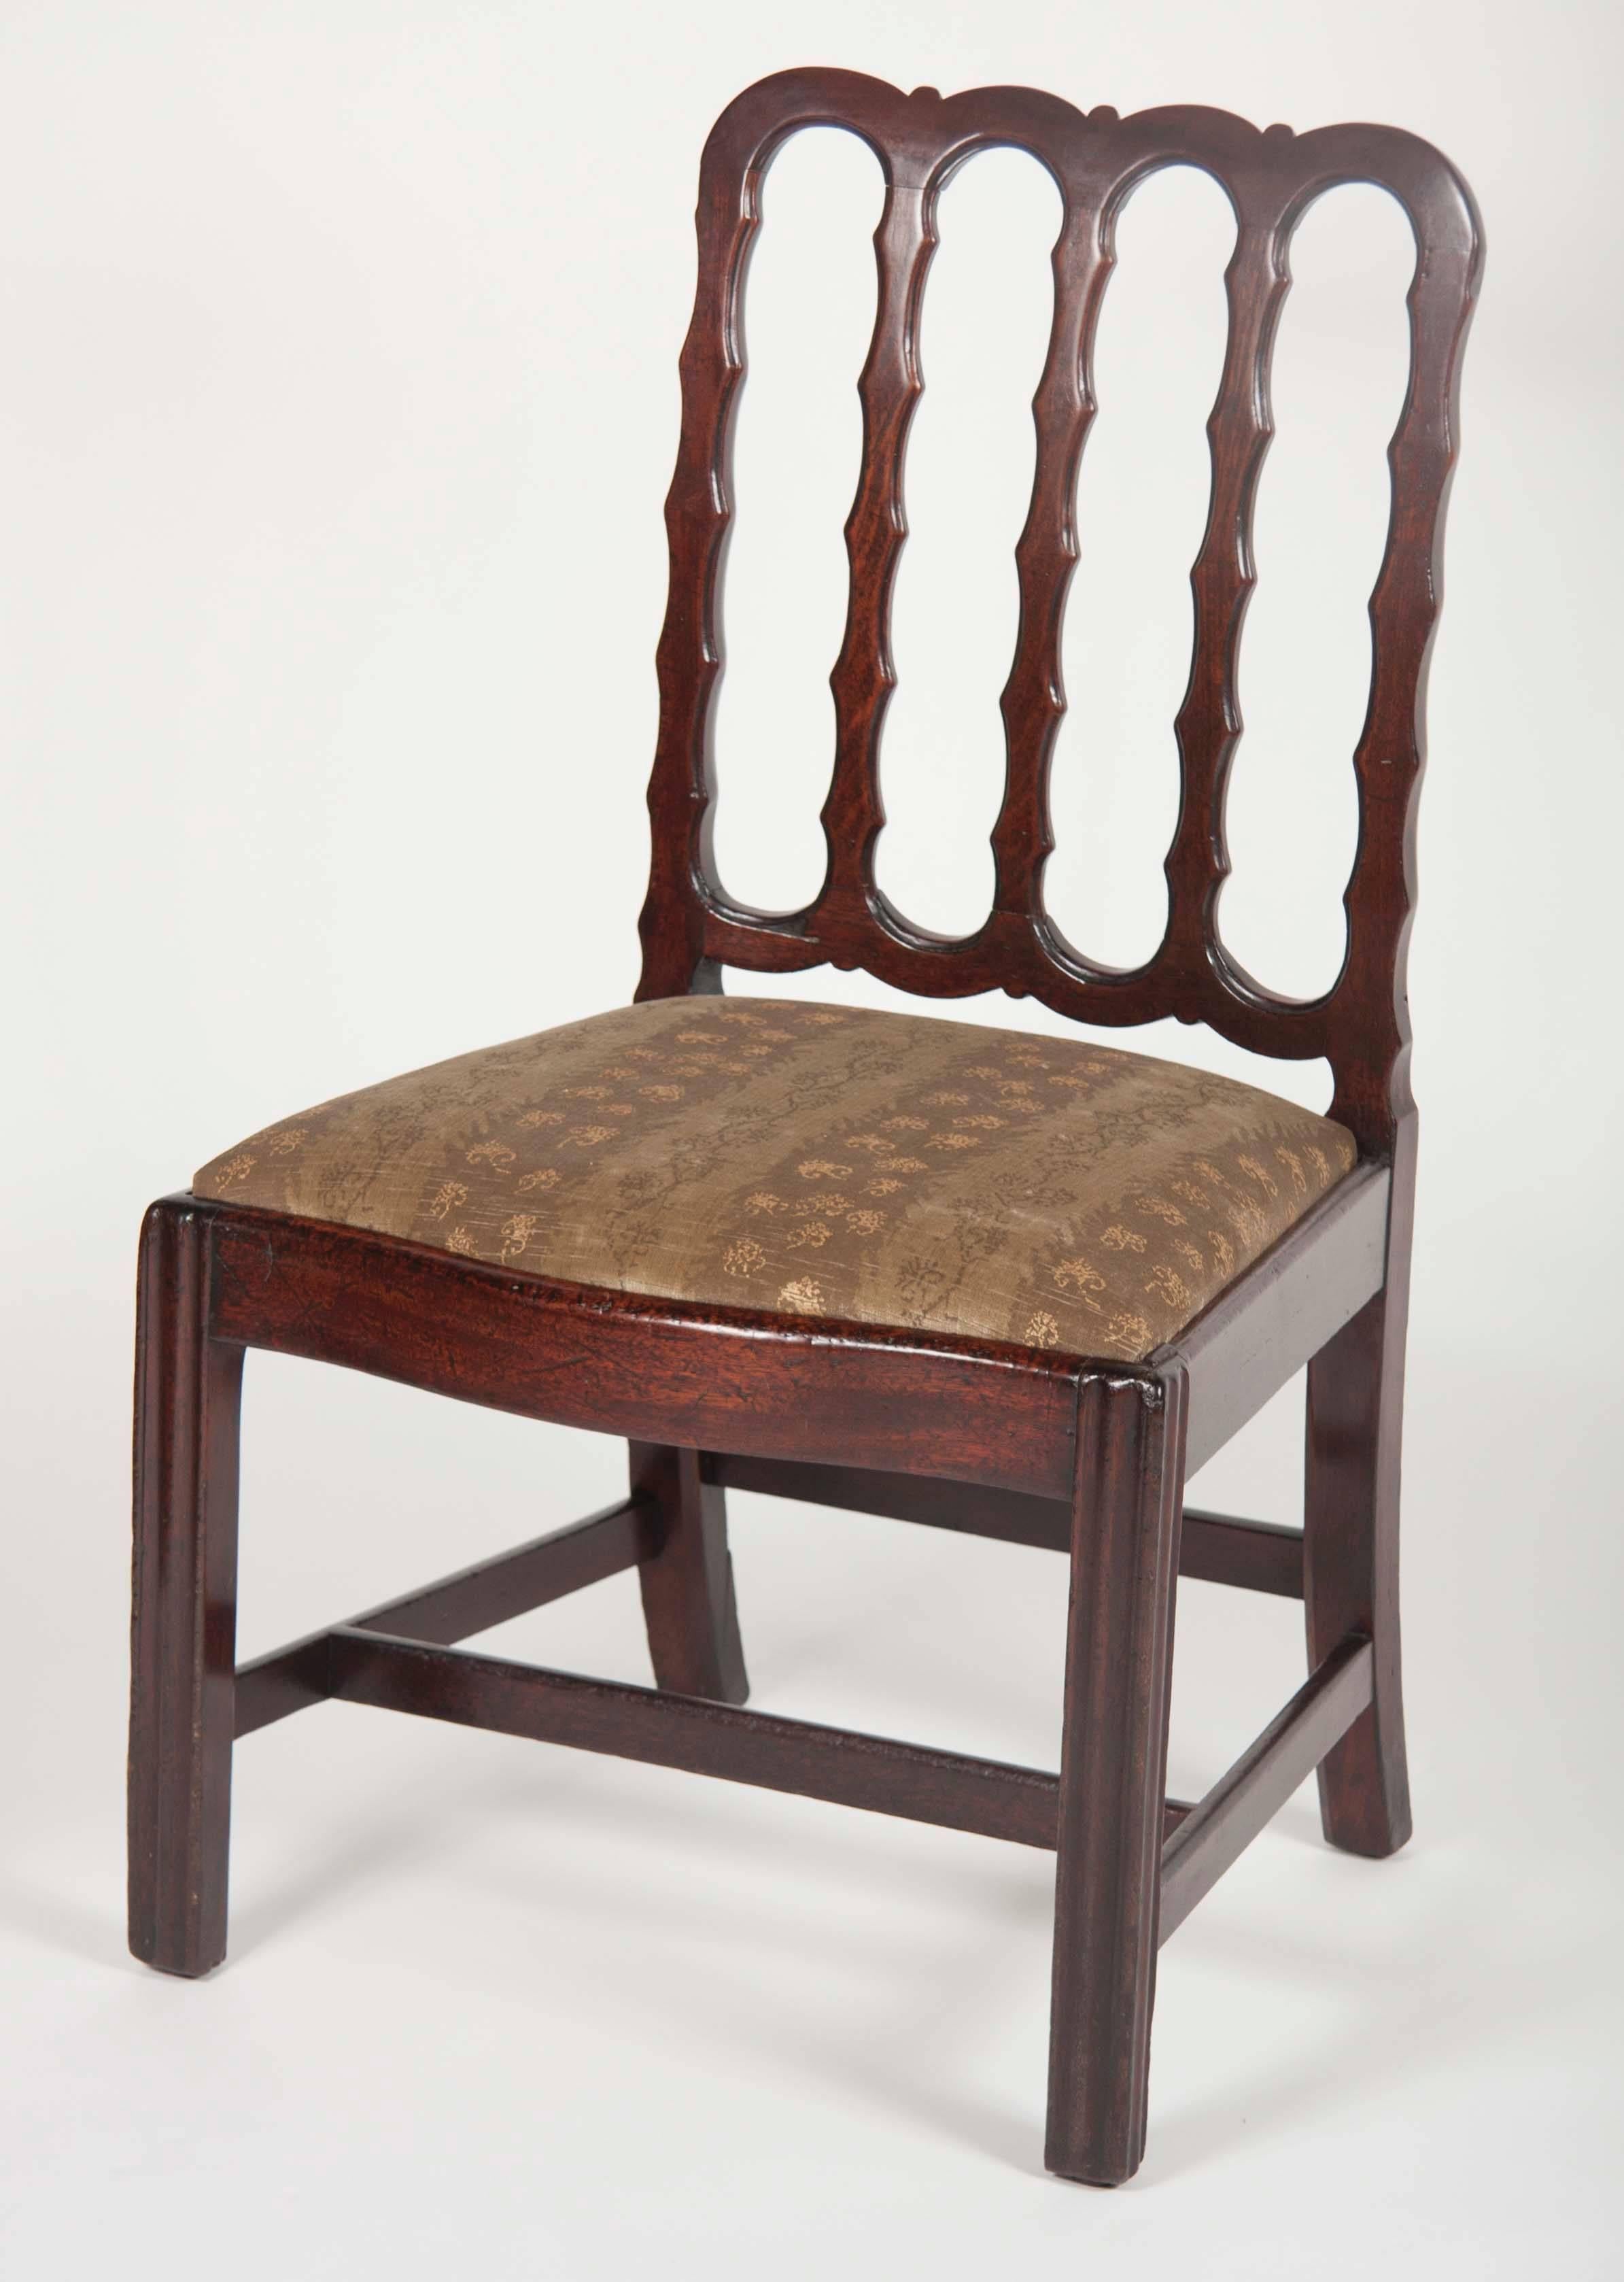 A George III period side chair of square form with serpentine crest and five undulating splats. This chair is most likely a Chinese Export chair in the English taste made of Padouk wood.
   
 